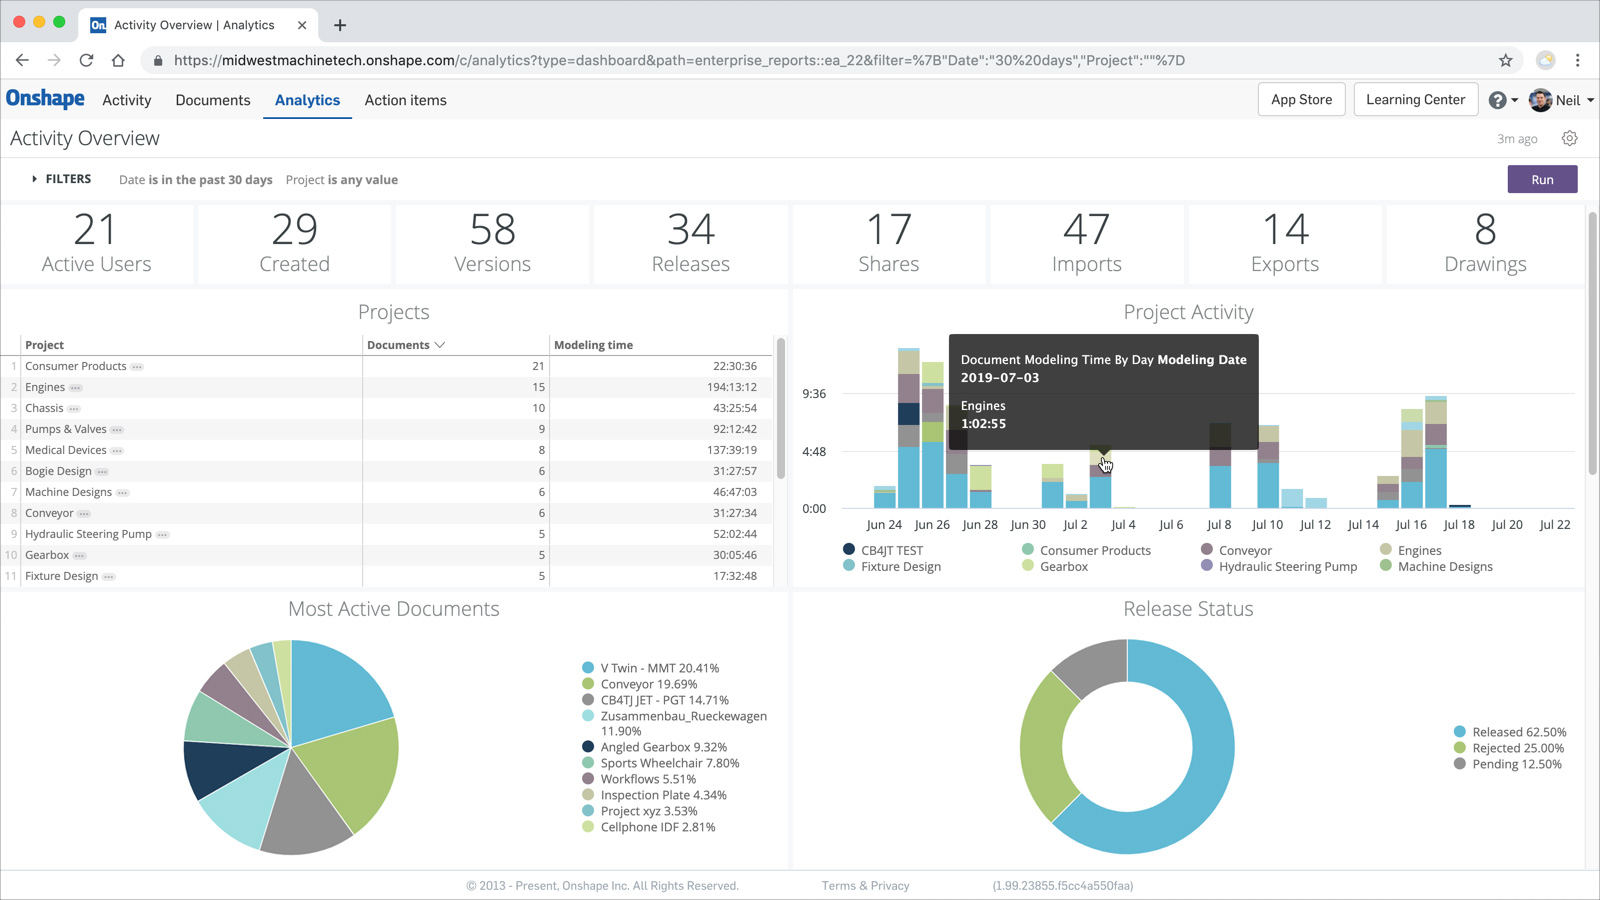 Screenshot of the product design analytics dashboard in Onshape.